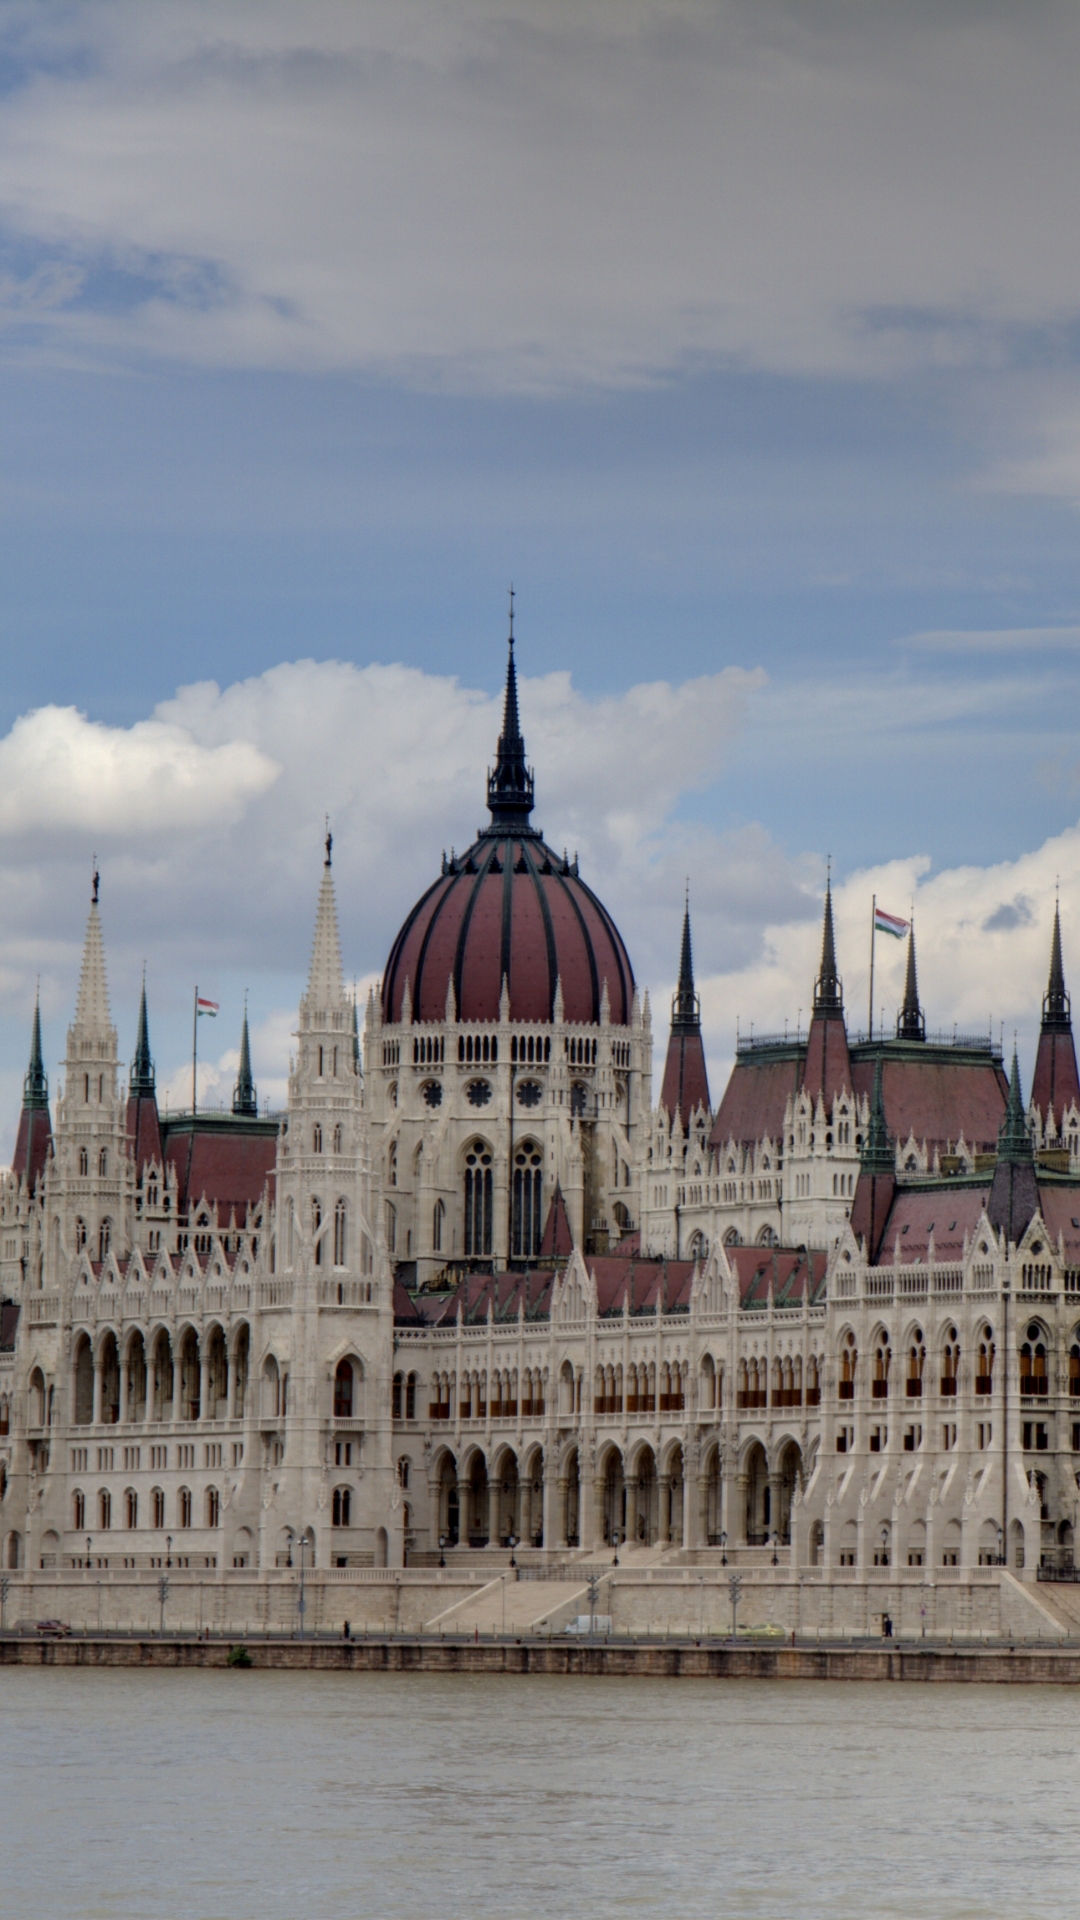 man made, hungarian parliament building, architecture, danube, hungary, budapest, monuments